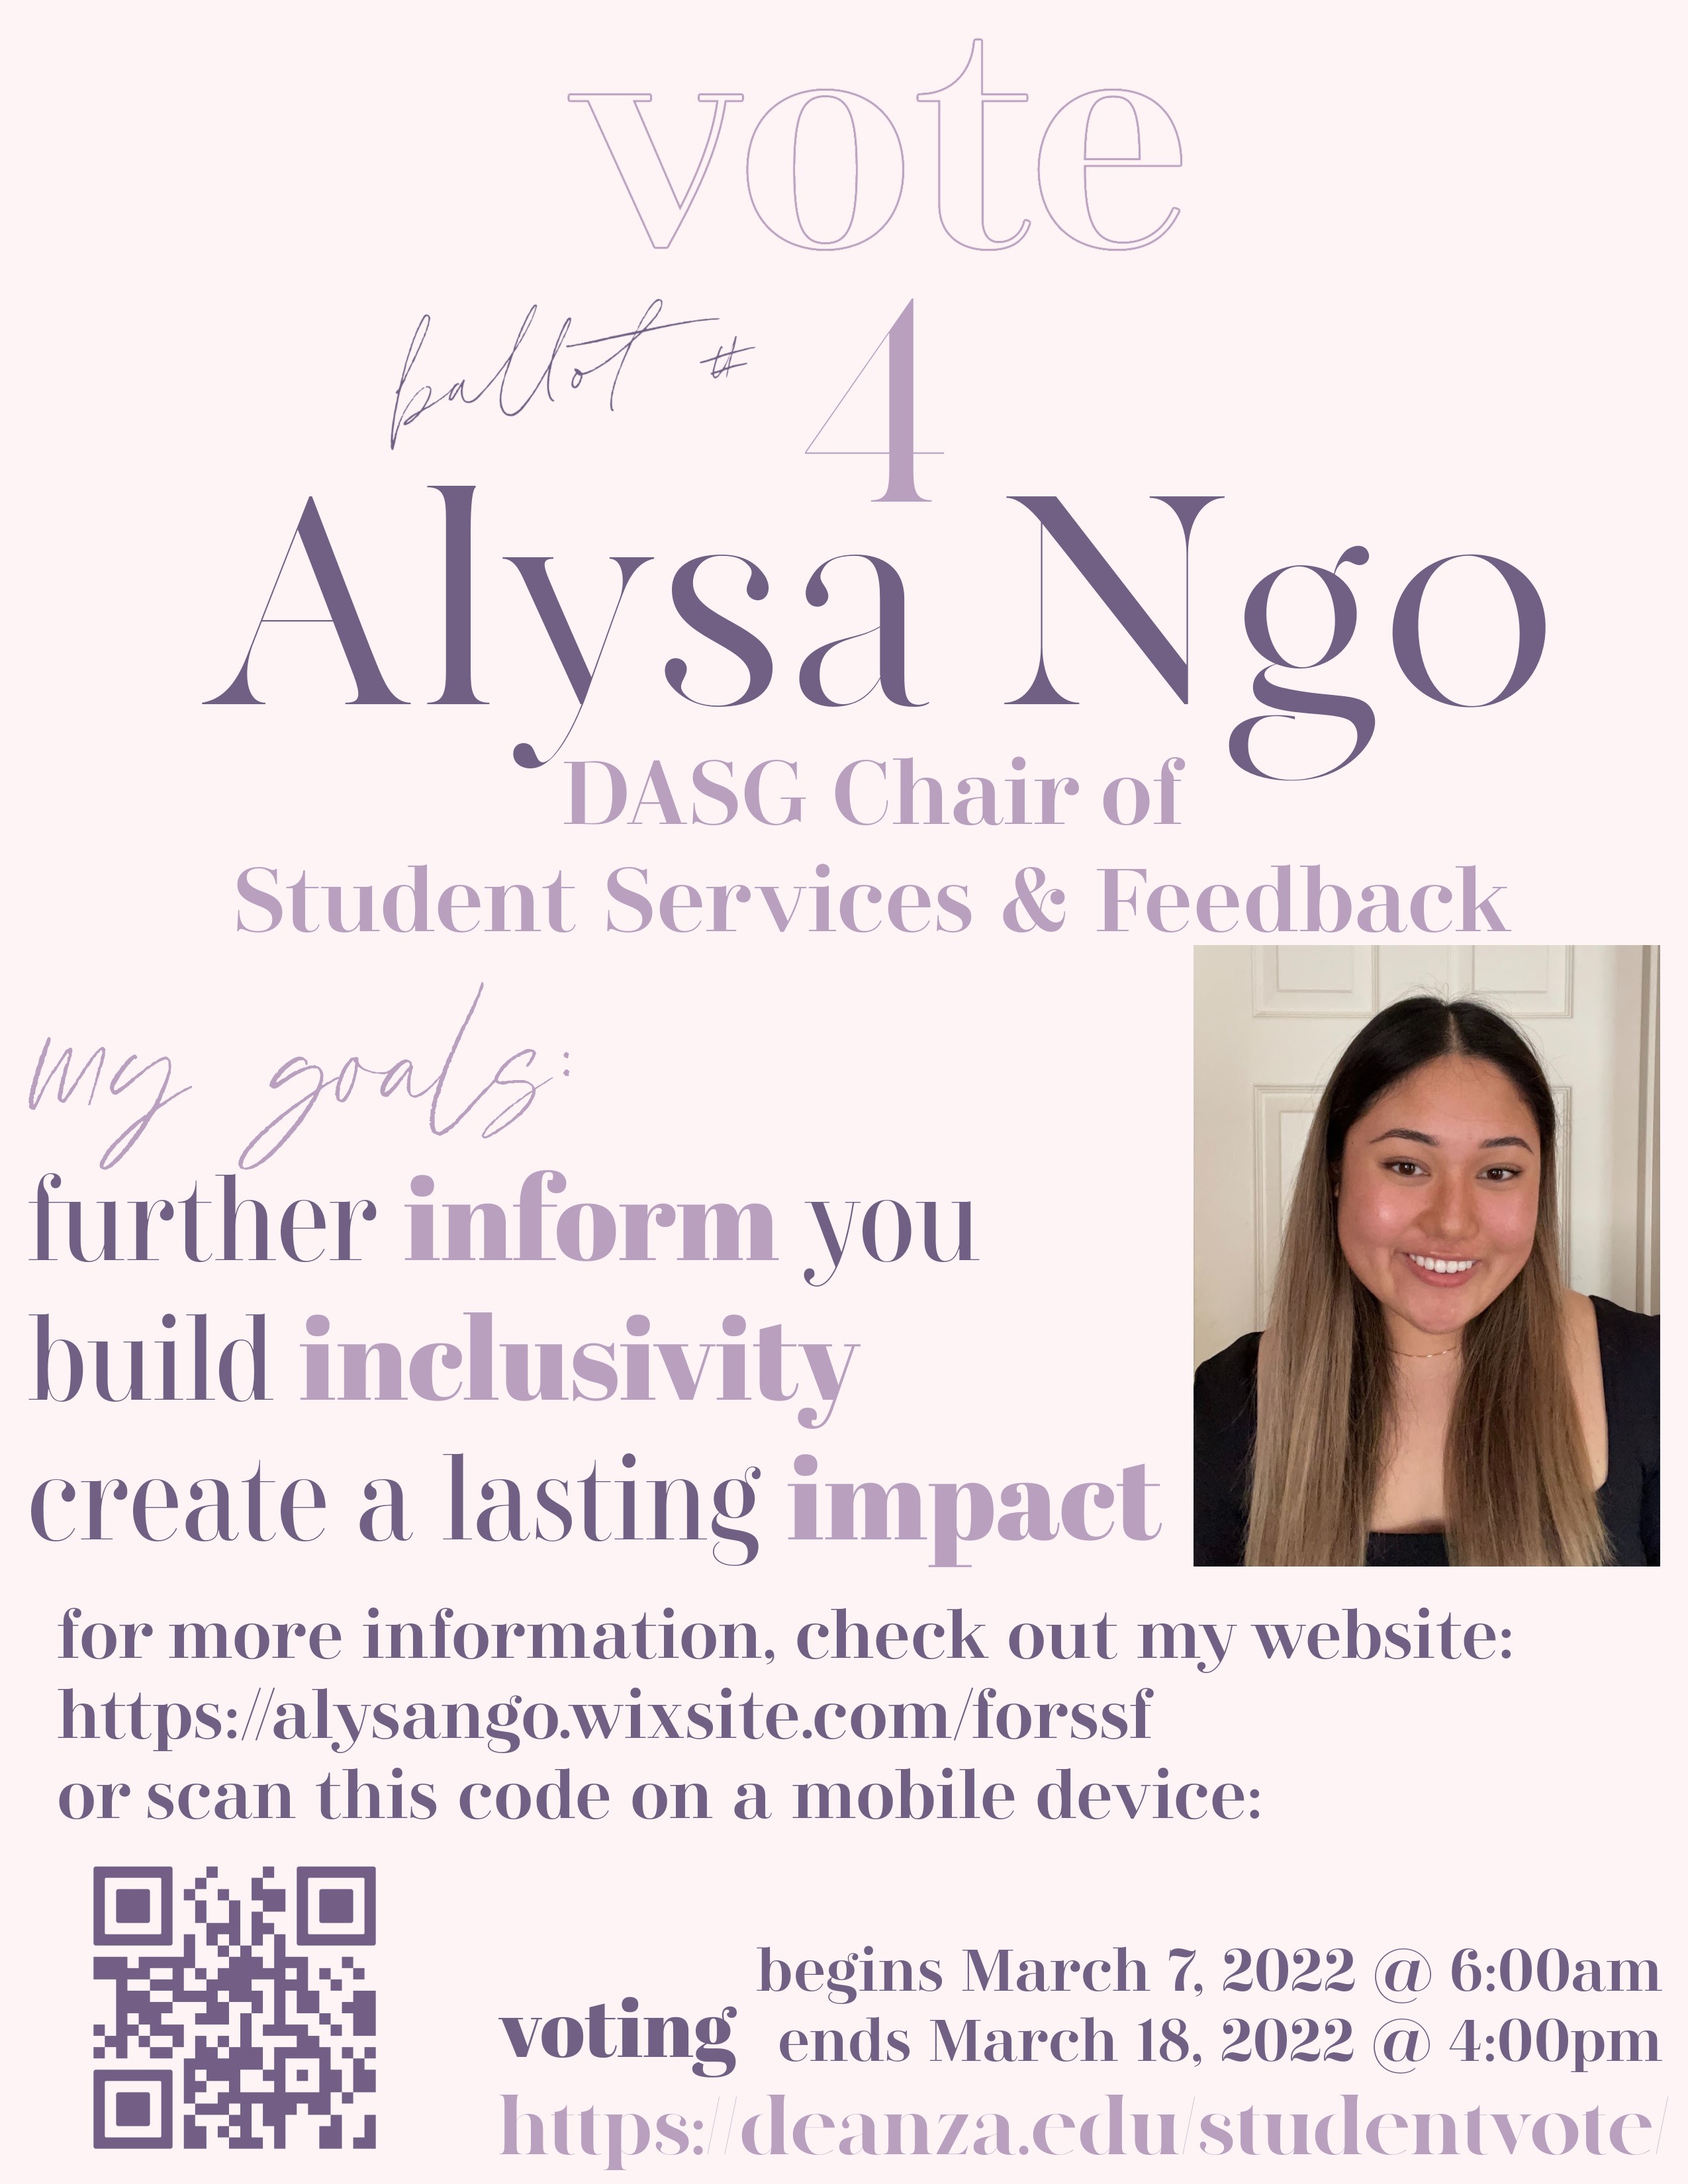 Vote [ballot #] 4 Alysa Ngo - DASG Chair of Student Services and Feedback. My goals are: to further inform you, build inclusivity, and create a lasting impact. For more information, check out my website at https://alysango.wixsite.com/forssf. Voting begins March 7, 2022 at 6:00a m and ends March 18, 2022 at 4:00 pm at https://www.deanza.edu/studentvote/.